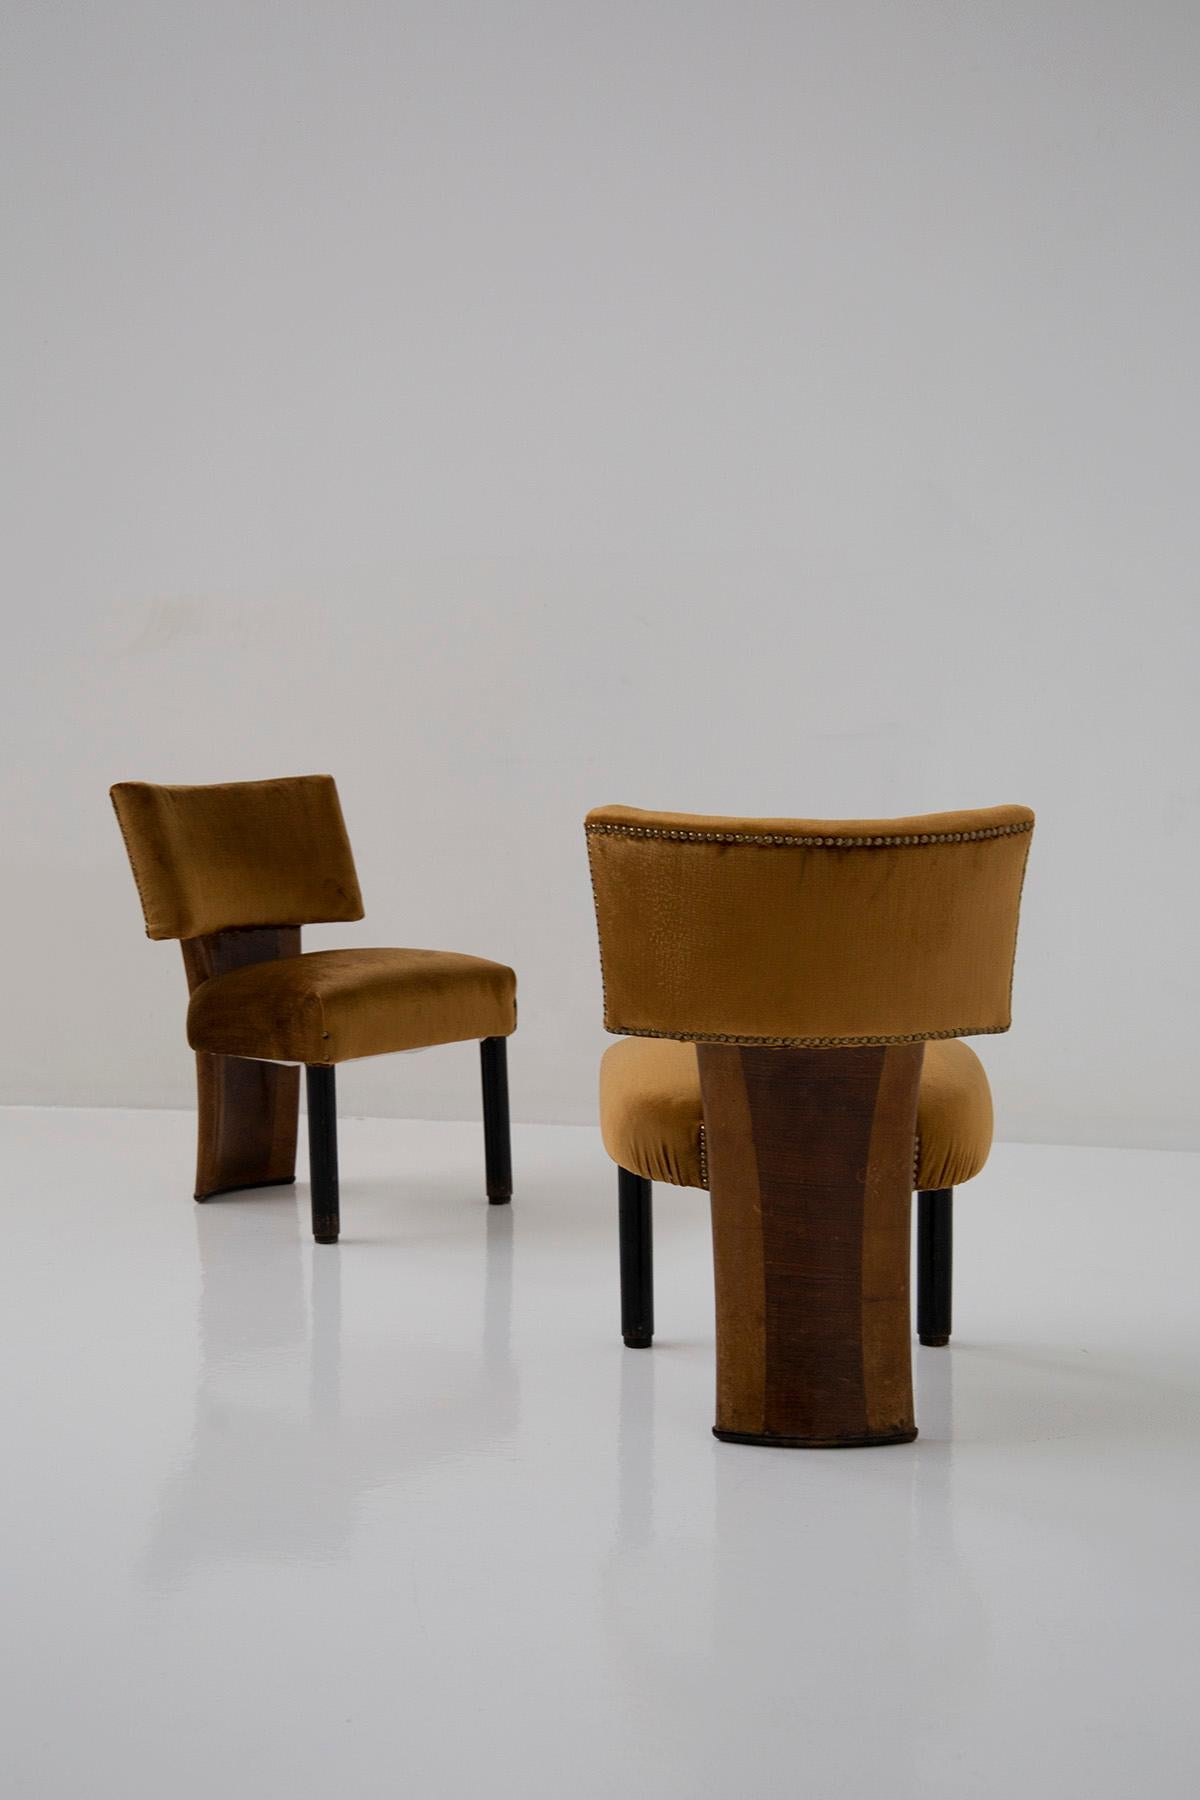 Introducing a magnificent pair of armchairs attributed to the renowned designer Gio Ponti, dating back to the 1930s-40s. These armchairs not only represent a significant era in Italian design but also exemplify the remarkable talent of Gio Ponti,